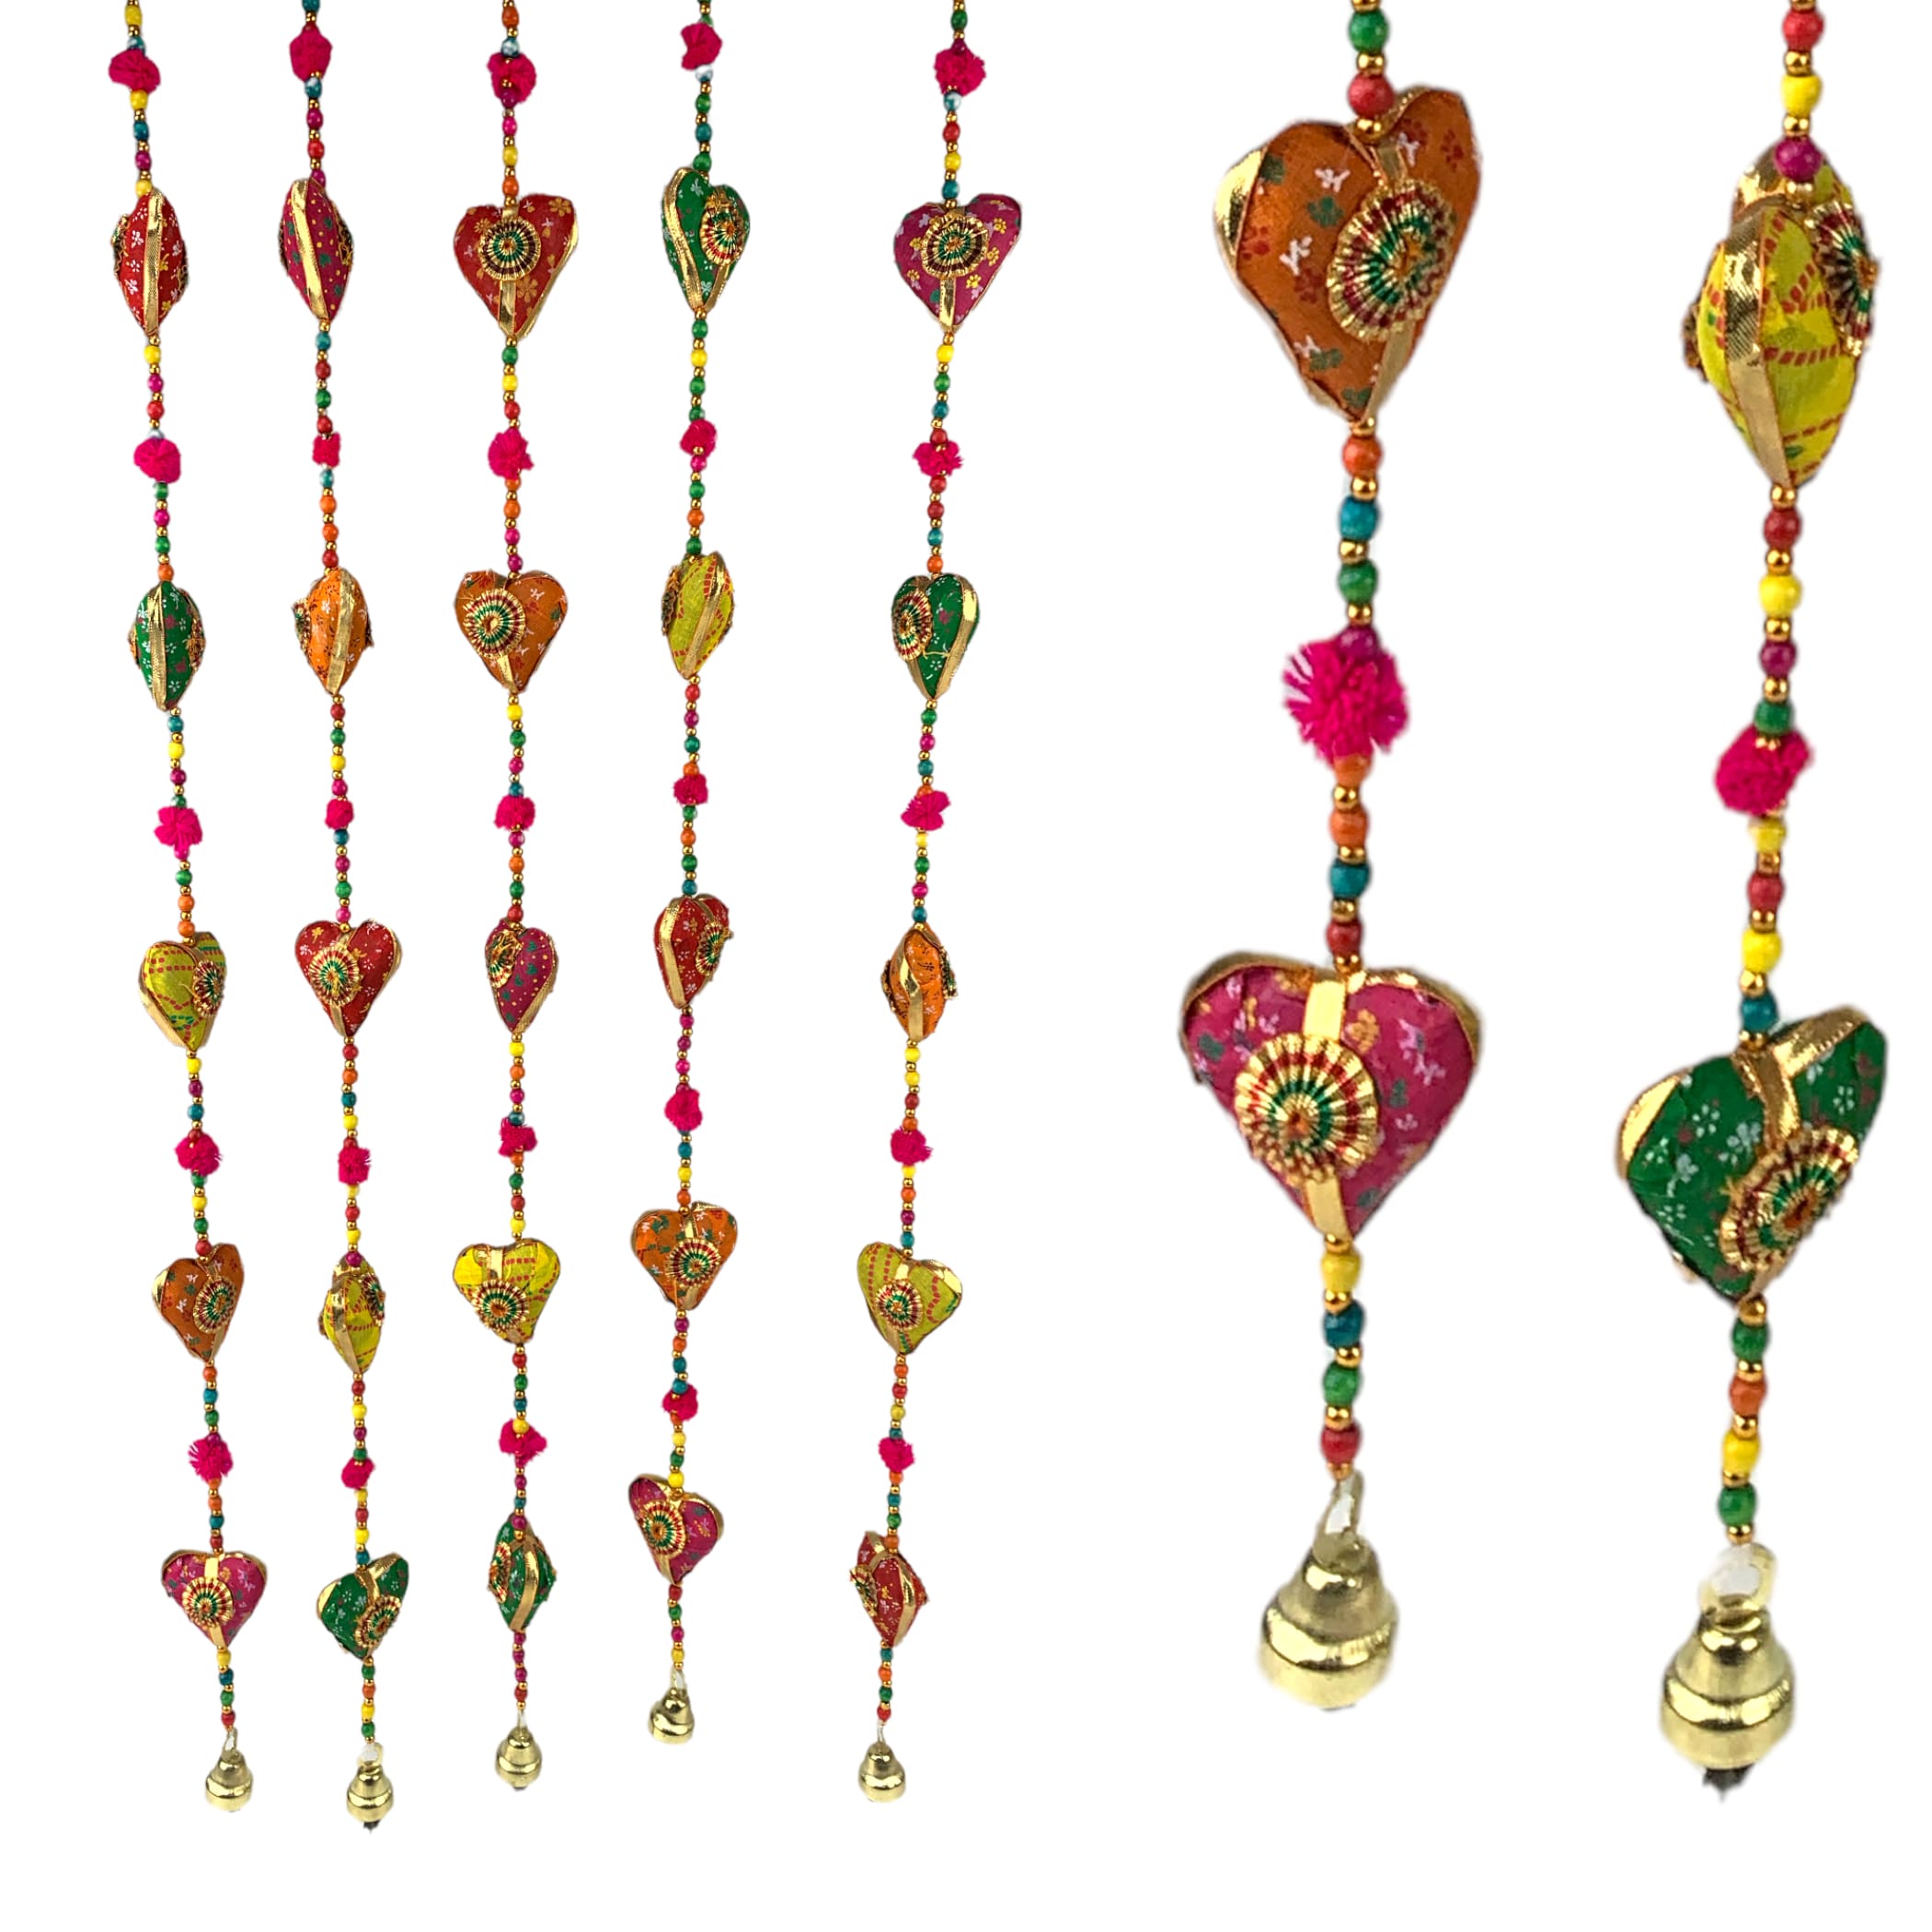 Rajasthani door hanging wind chime 6 strings wall indian